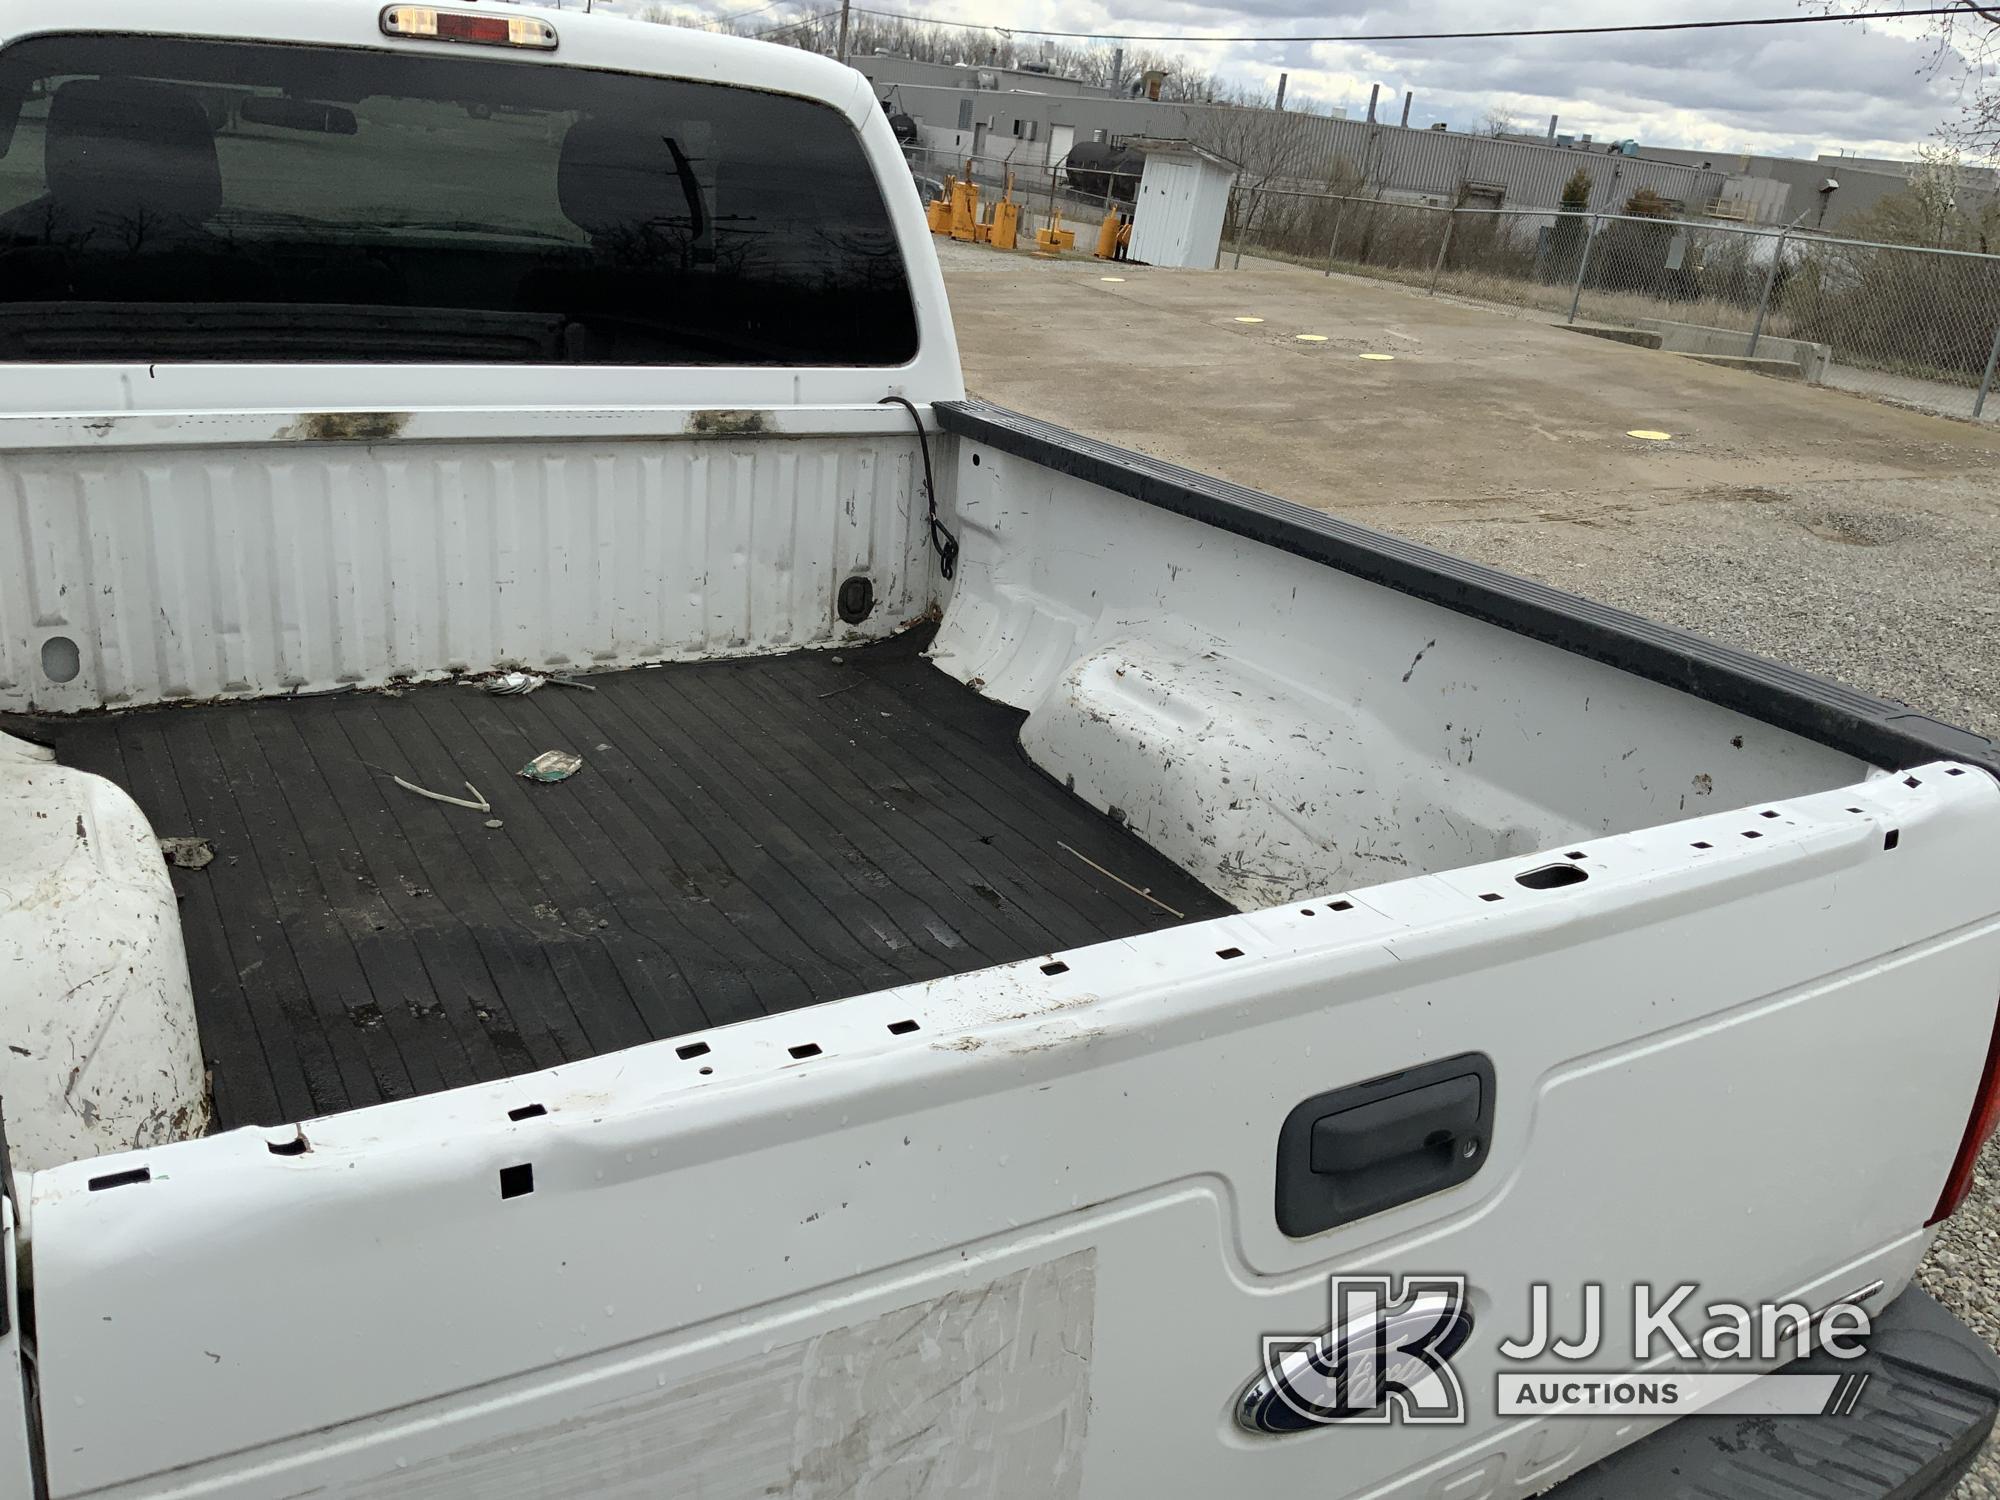 (Fort Wayne, IN) 2015 Ford F250 4x4 Extended-Cab Pickup Truck Runs & Moves, Check Engine Light On) (